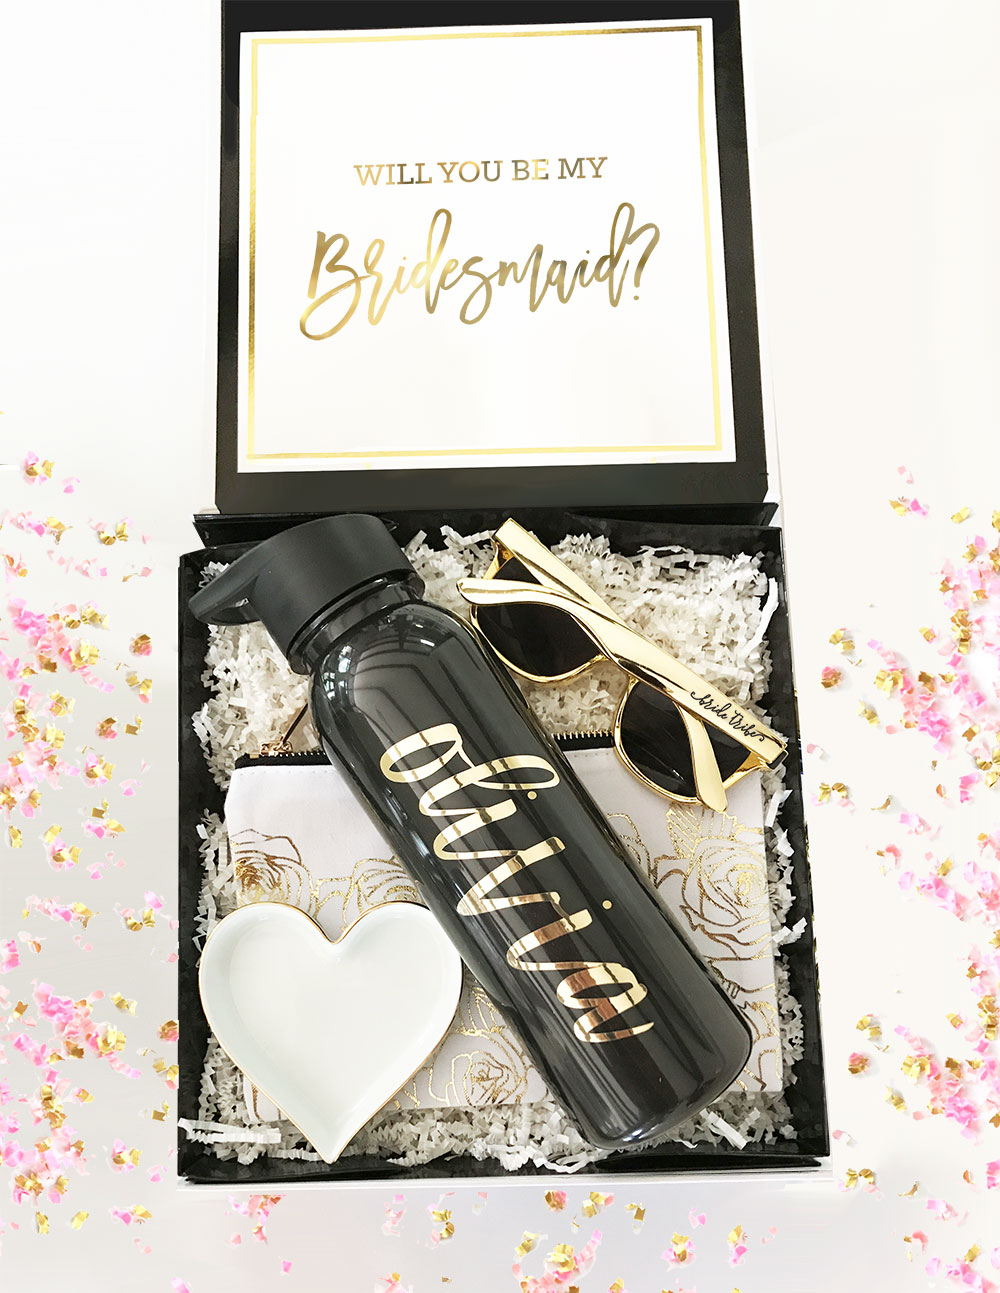 Black Gift Boxes - Gold Text